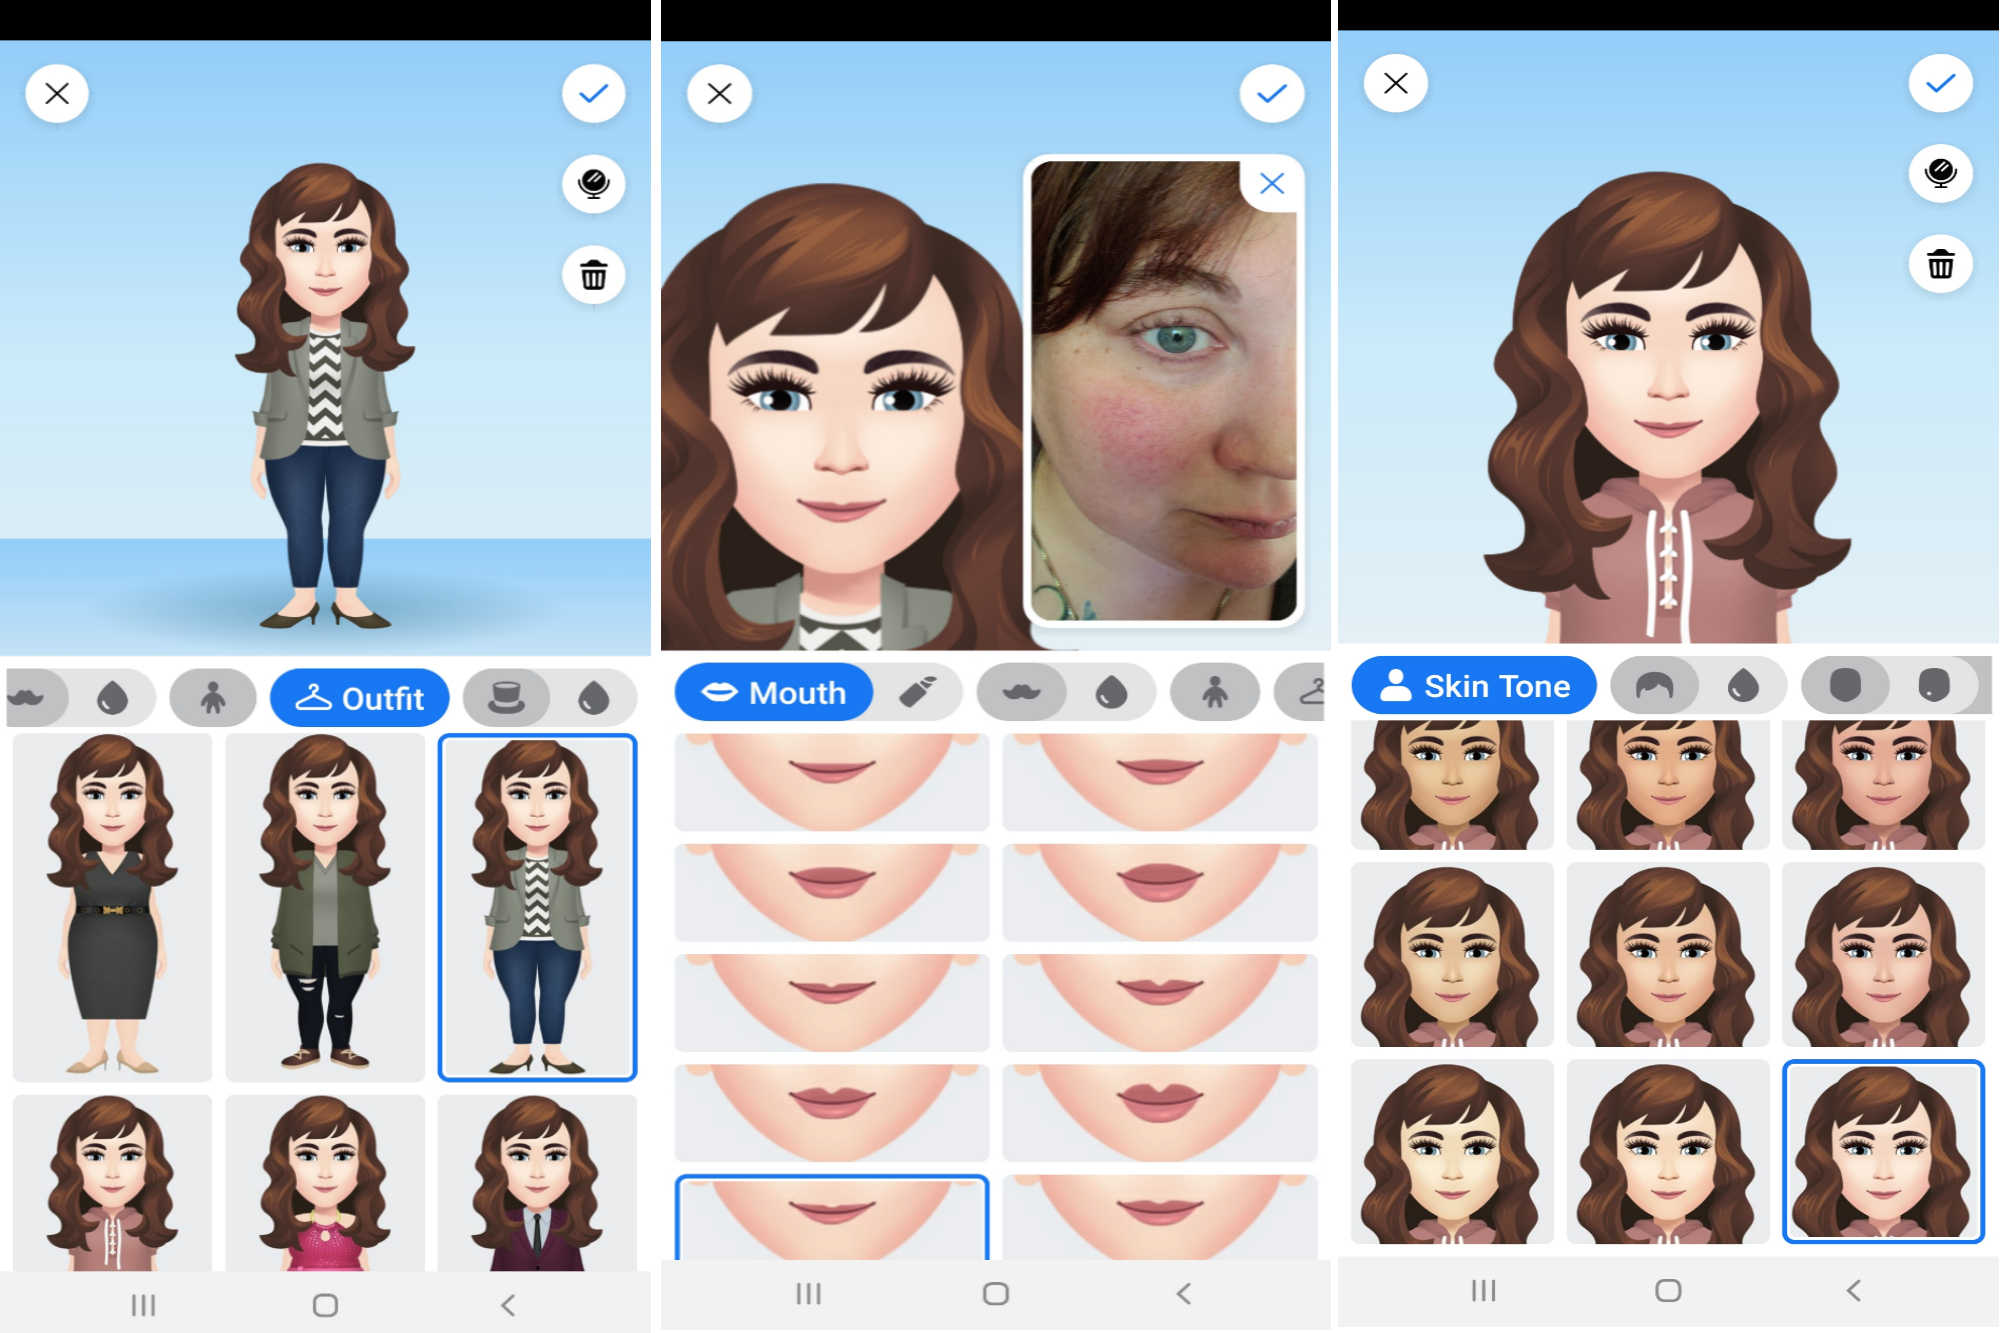 Facebook Avatars Launched In India Heres How To Create Your Avatar  Tech